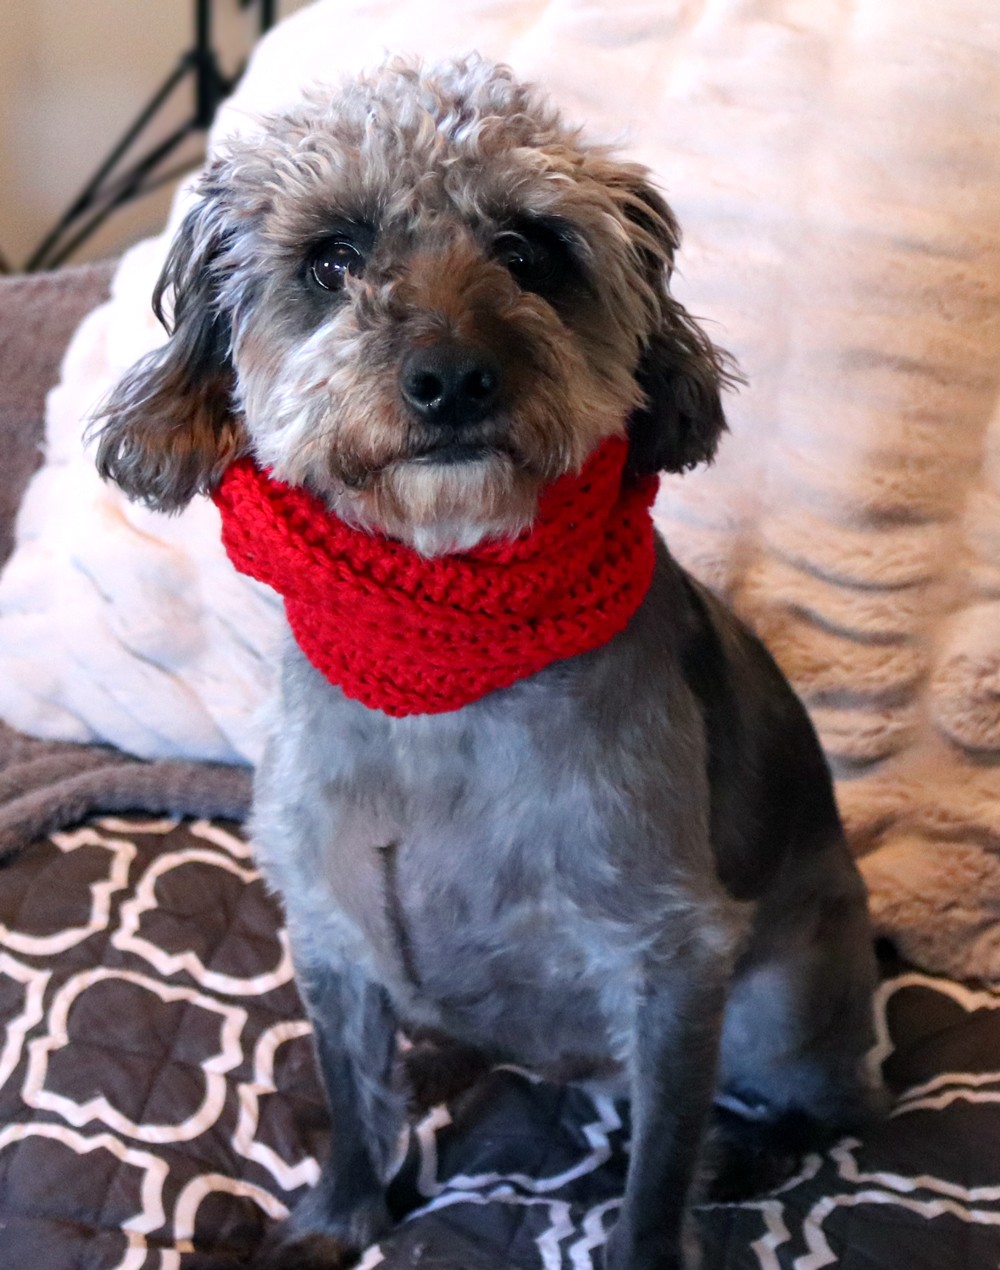 Skarf Dog Scarf Review - Valentines Day Gifts for Pet Lovers by popular Los Angeles cruelty free blogger My Beauty Bunny